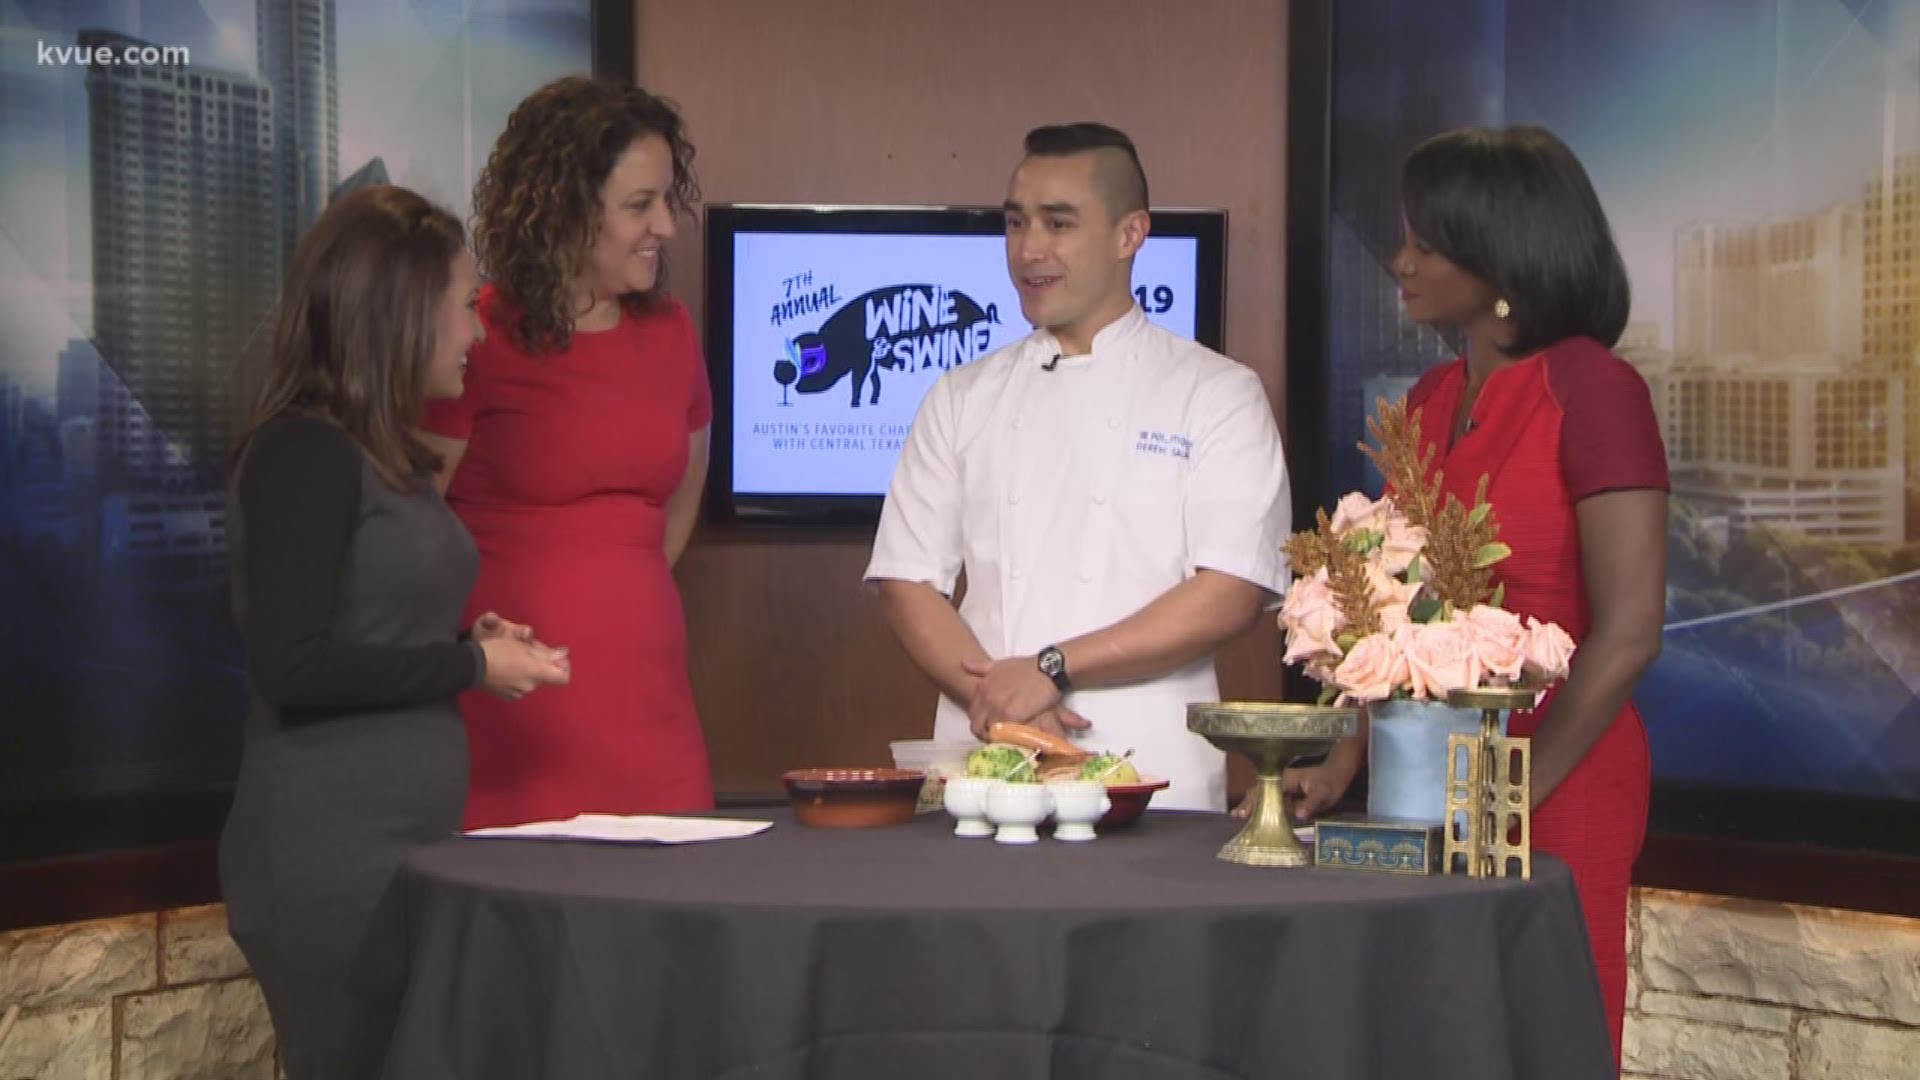 Austin Food & Wine Alliance Executive Director Mariam Parker and Le Politique Executive Chef Derek Salkin discusses the 7th Annual Wine & Swine, which will be Nov. 19 at Camp Mabry.